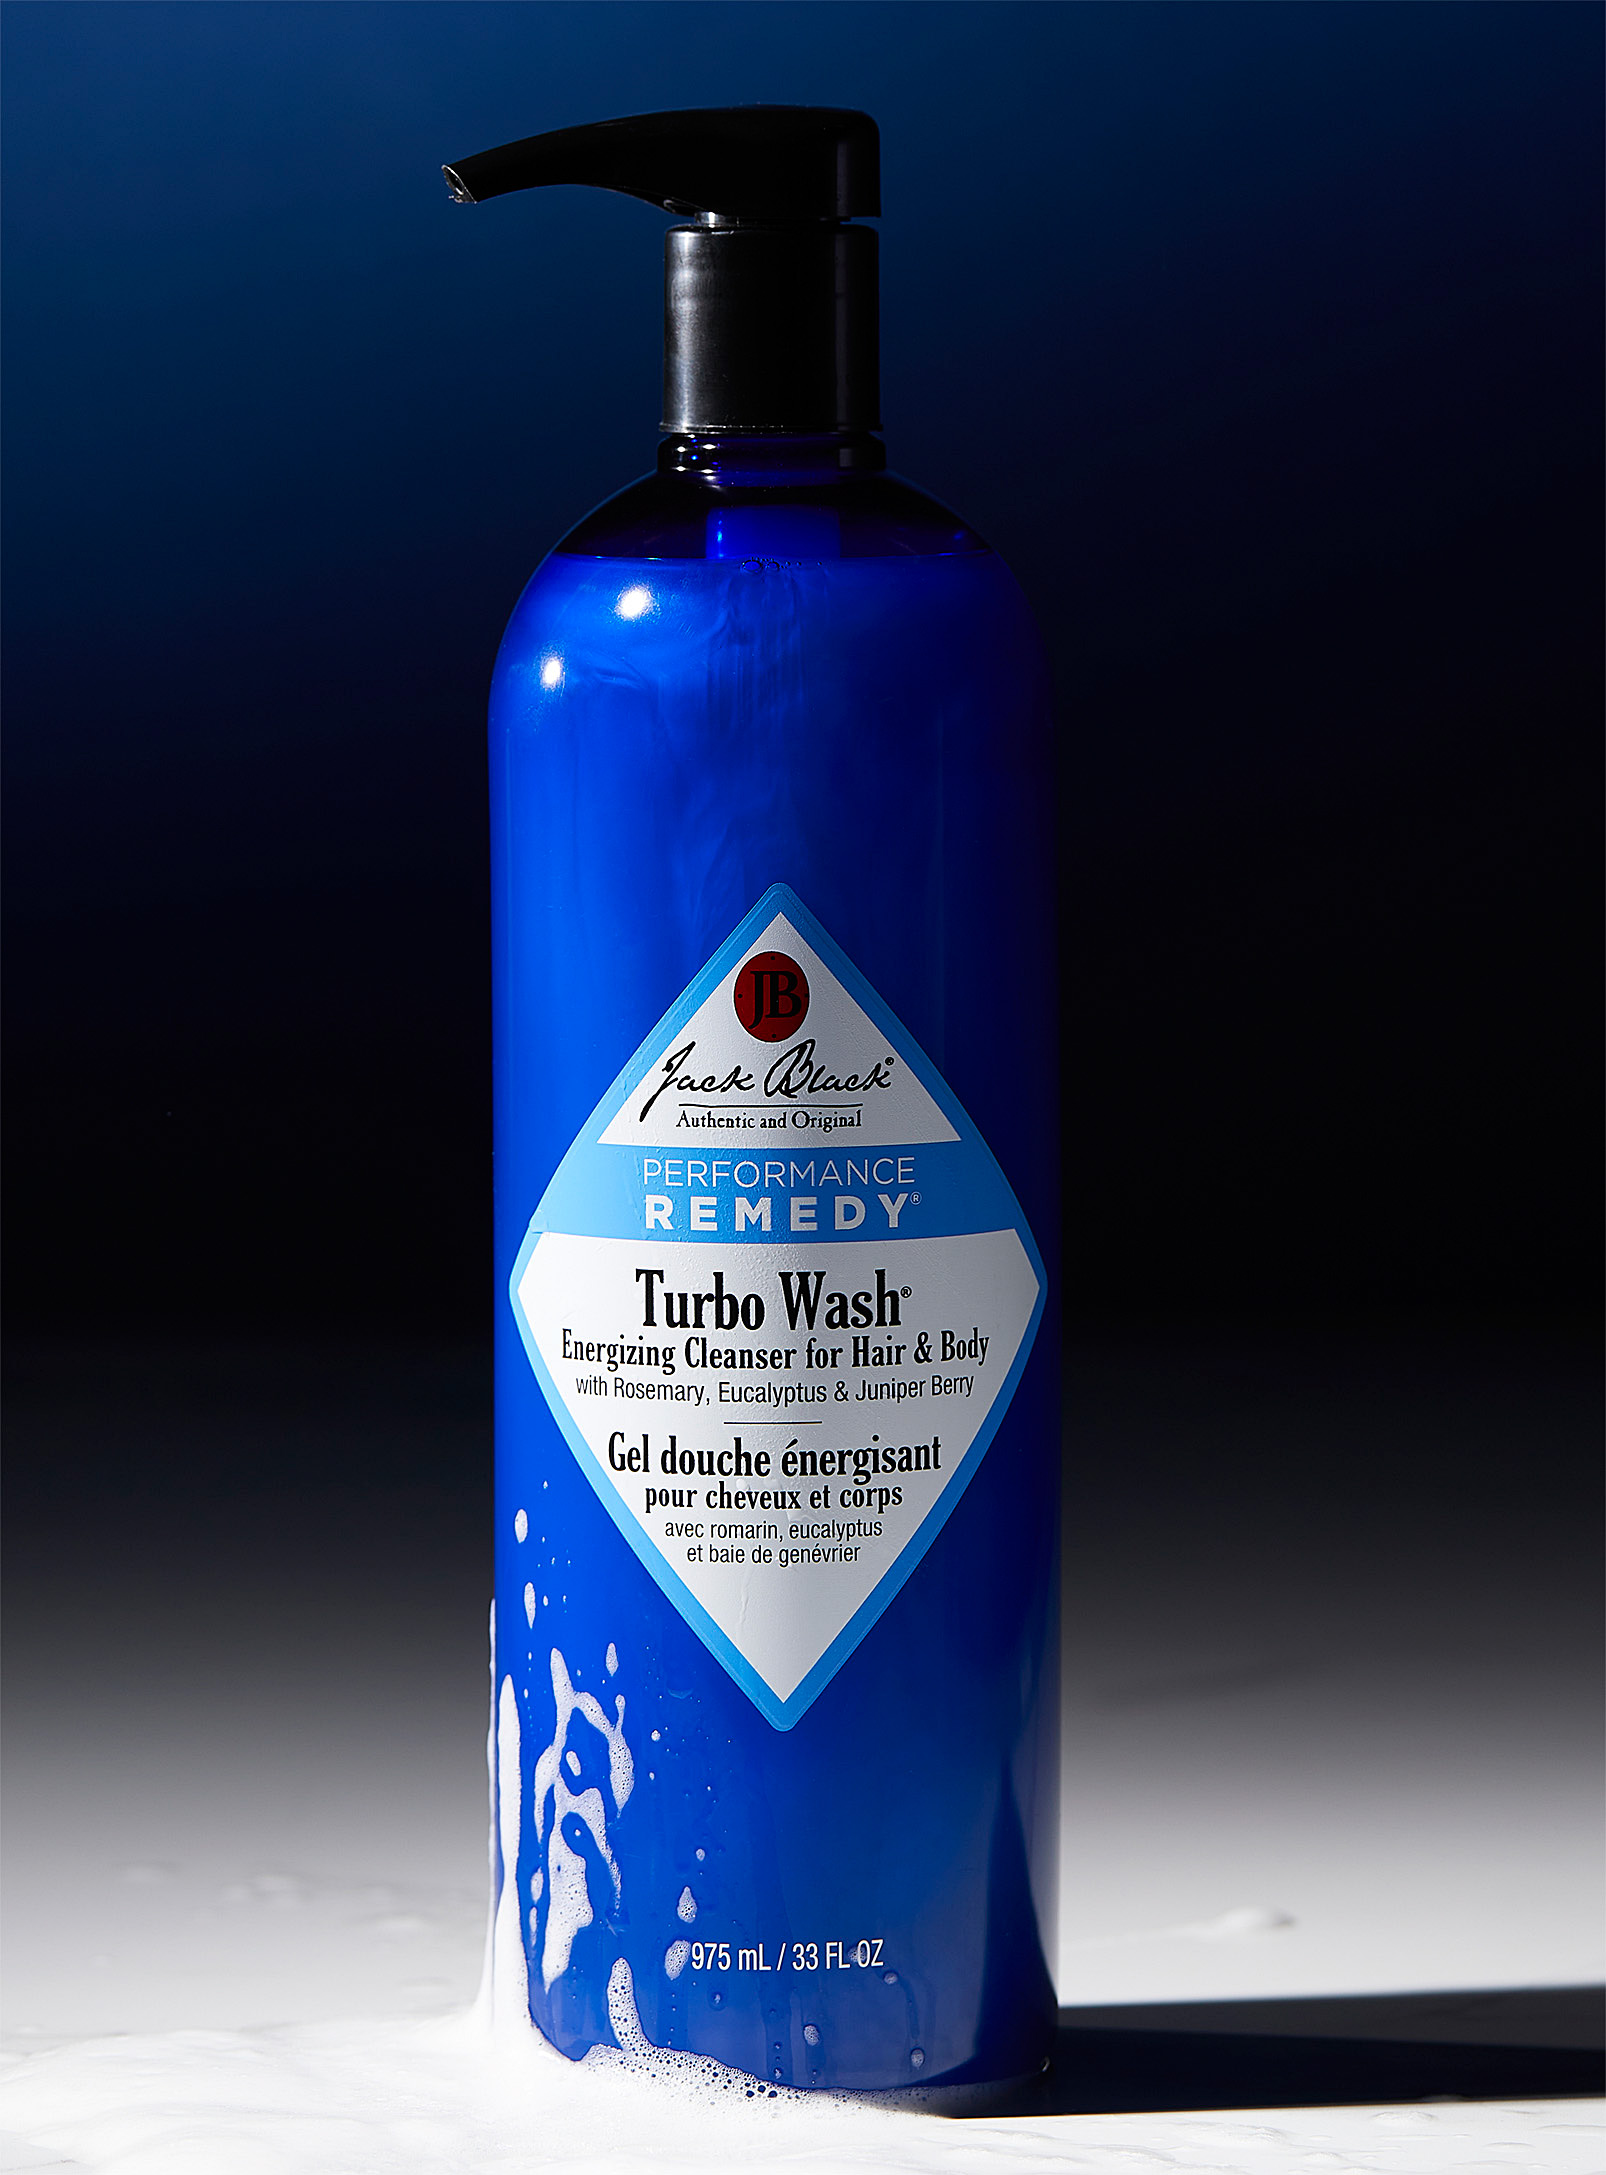 Jack Black - Turbo Wash energizing cleanser for hair and body